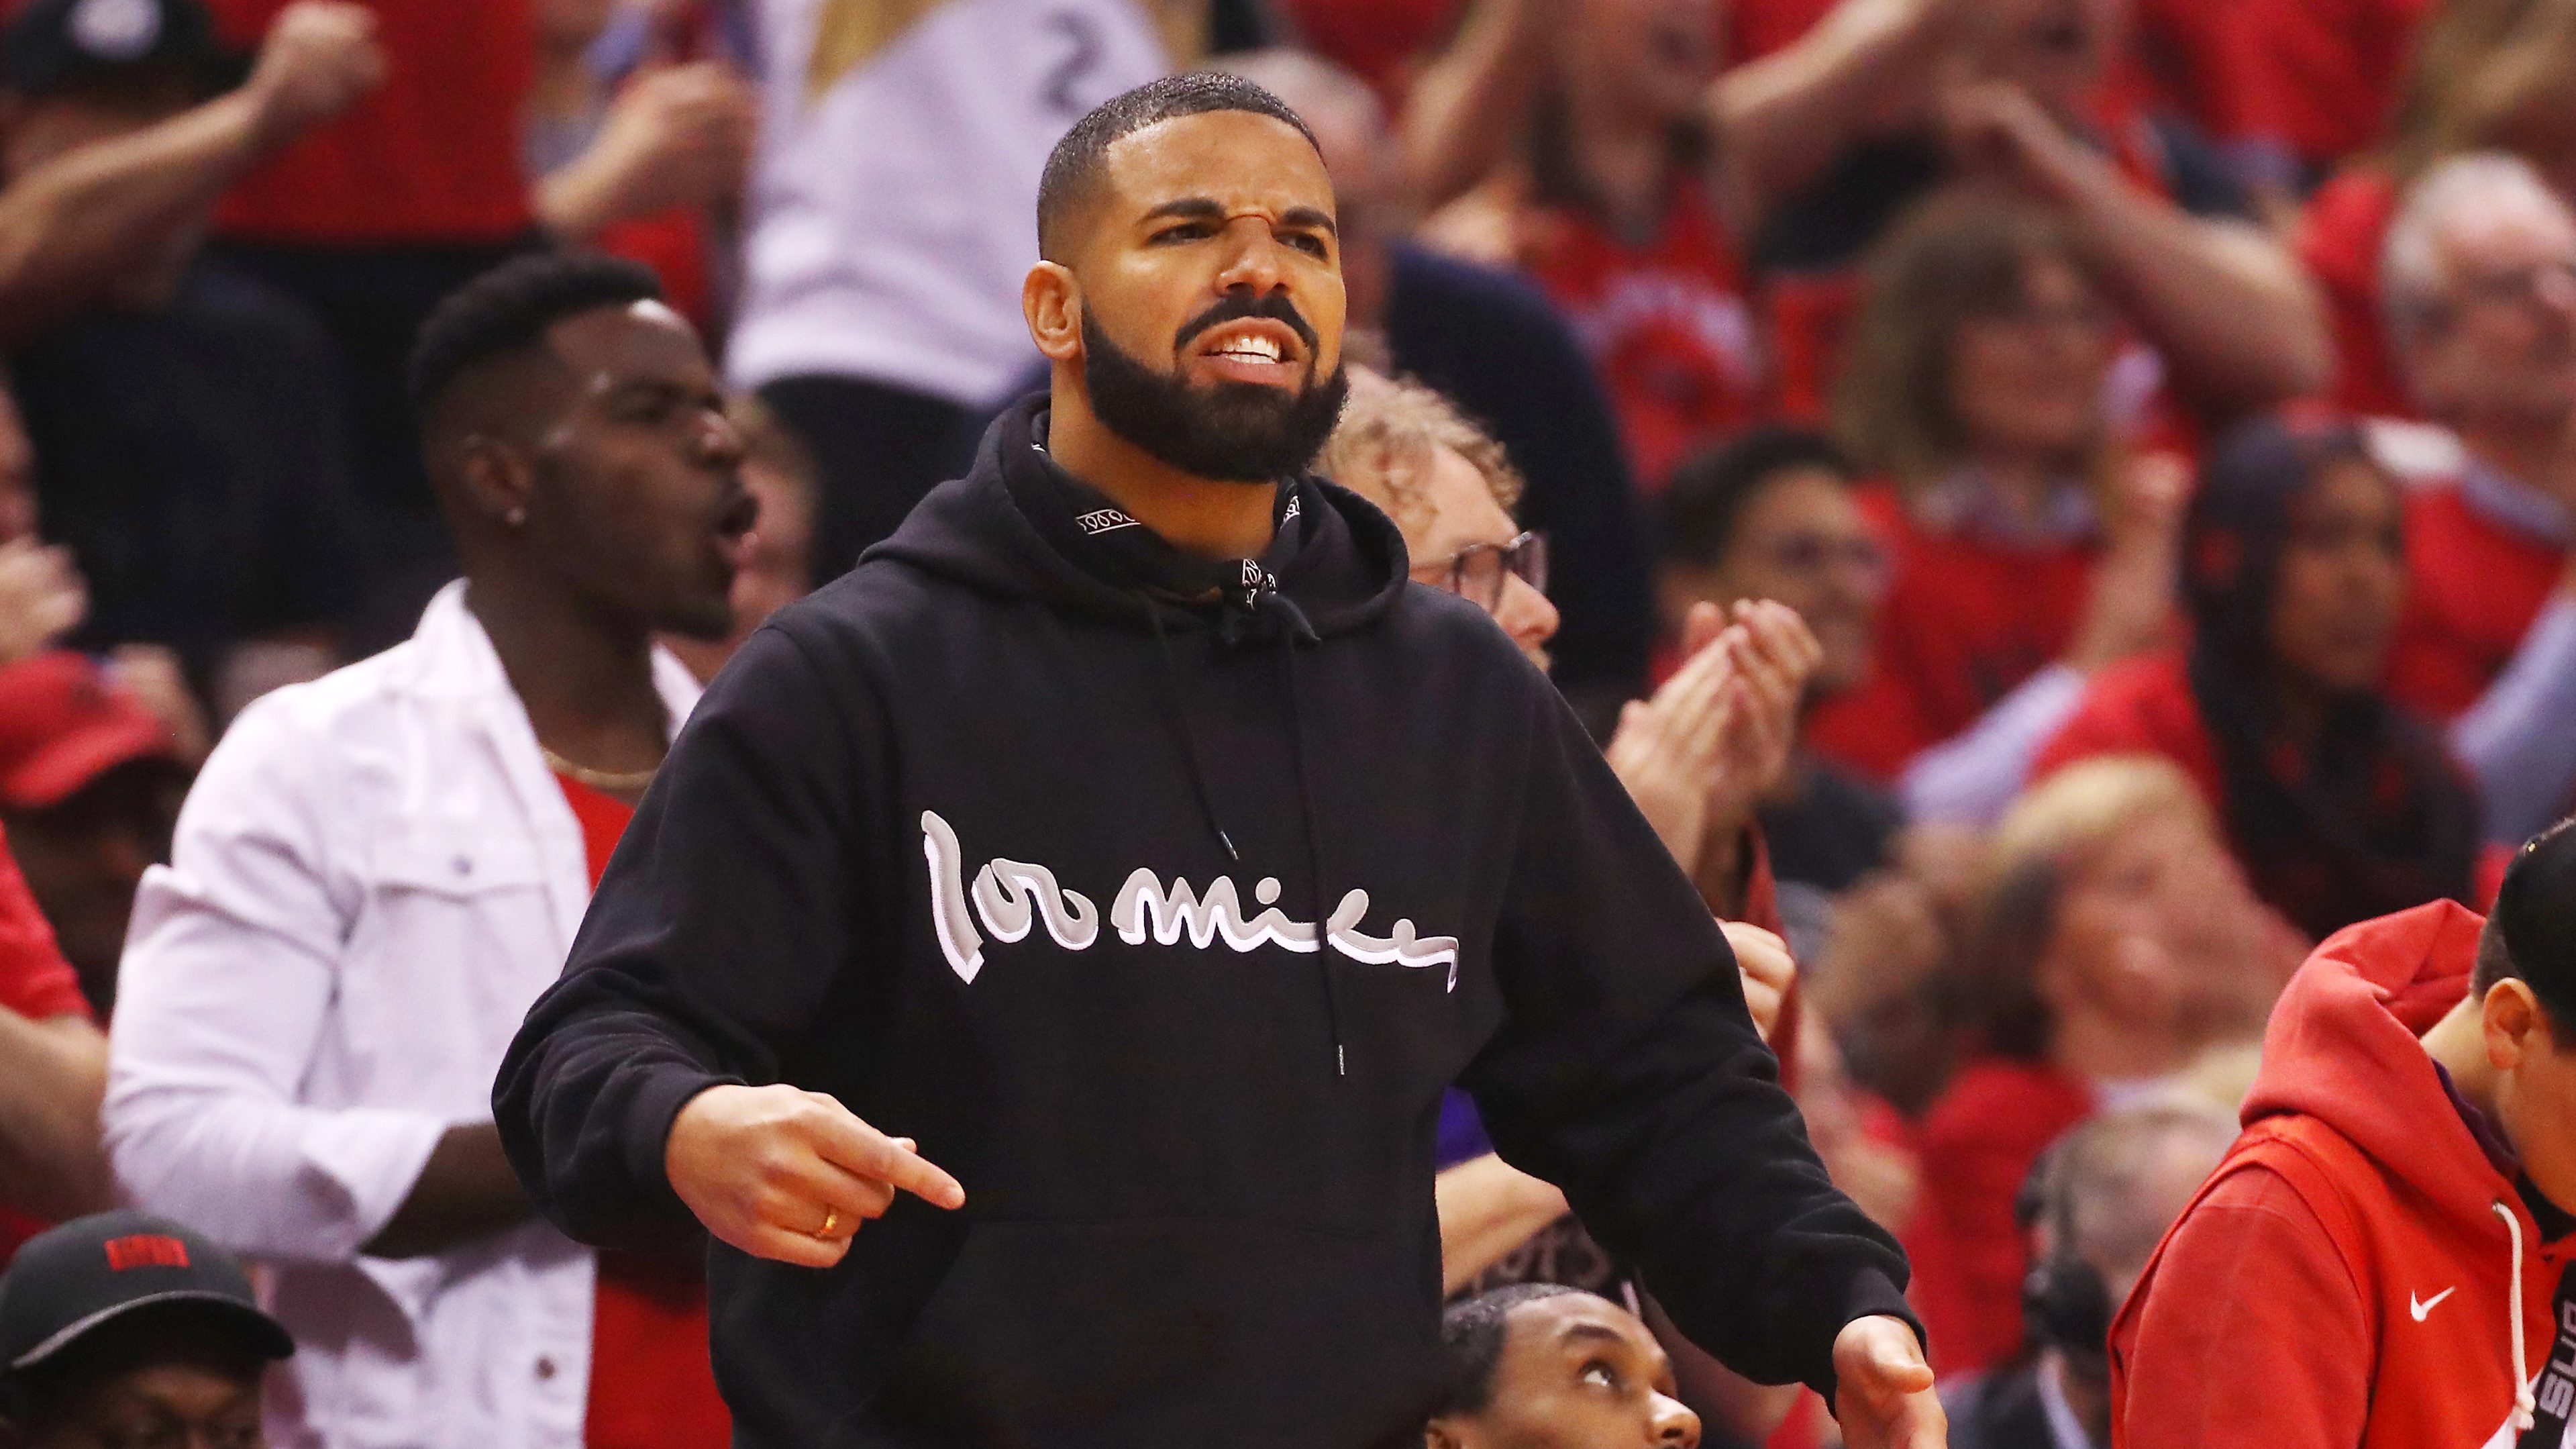 Drake Appears to Have Kevin Durant & Stephen Curry Warriors Tattoos